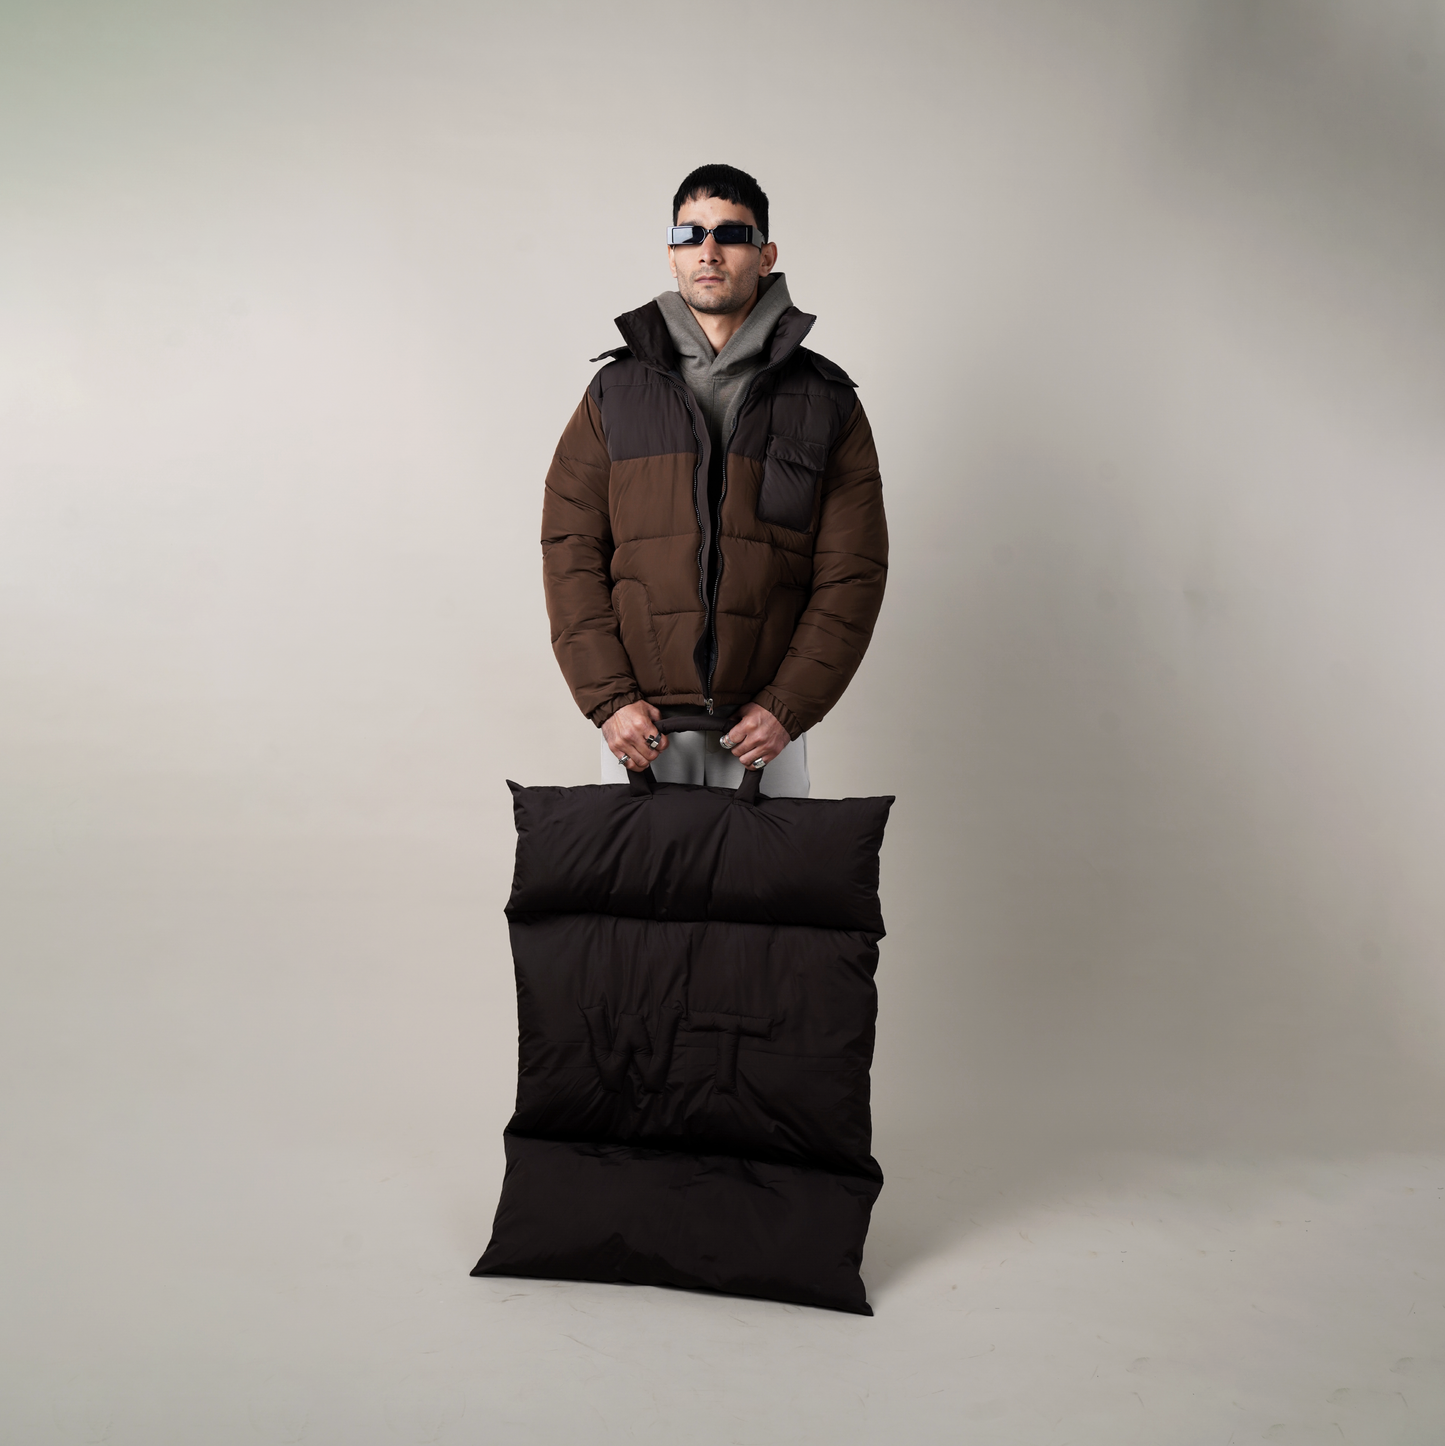 UTILITY BAG, UTILITY PUFFER JACKET, STREETWEAR, MENS STREET STYLE,The WT Puffer Jacket, monochromatic colUor palette,  jetted patch pocket, angular zipped welt pockets, light weight material, detachable hood and a long collar, UNISEX , RELAXED FIT,  WIND PROOF, WATER REPELLENT, BROWN PUFFER, BROWN PUFFER JACKET, BROWN PUFFER JACKET NORTHFACE, BROWN PUFFER JACKET MENS, PUFFER VEST, BROWN PUFFER WARPING THEORIES, people also ask 